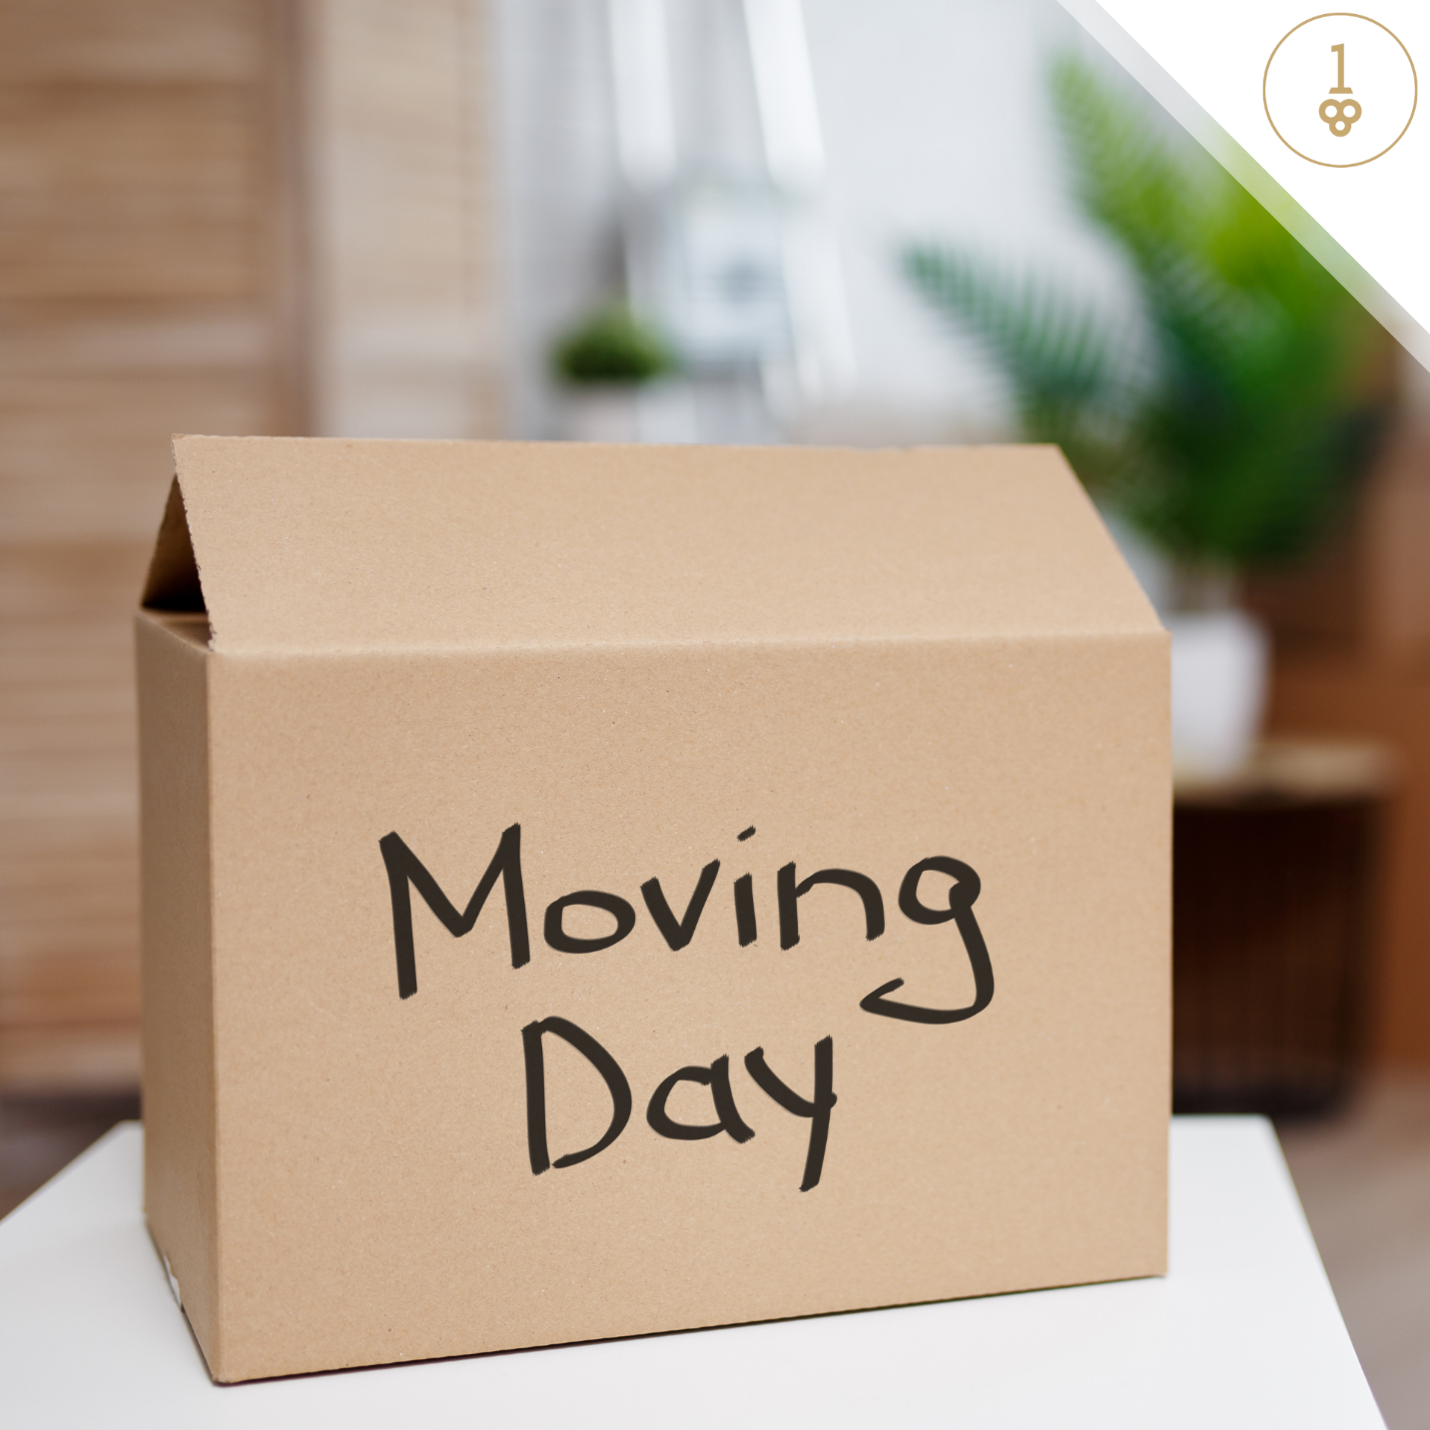 A cardboard box with the words moving day written on it